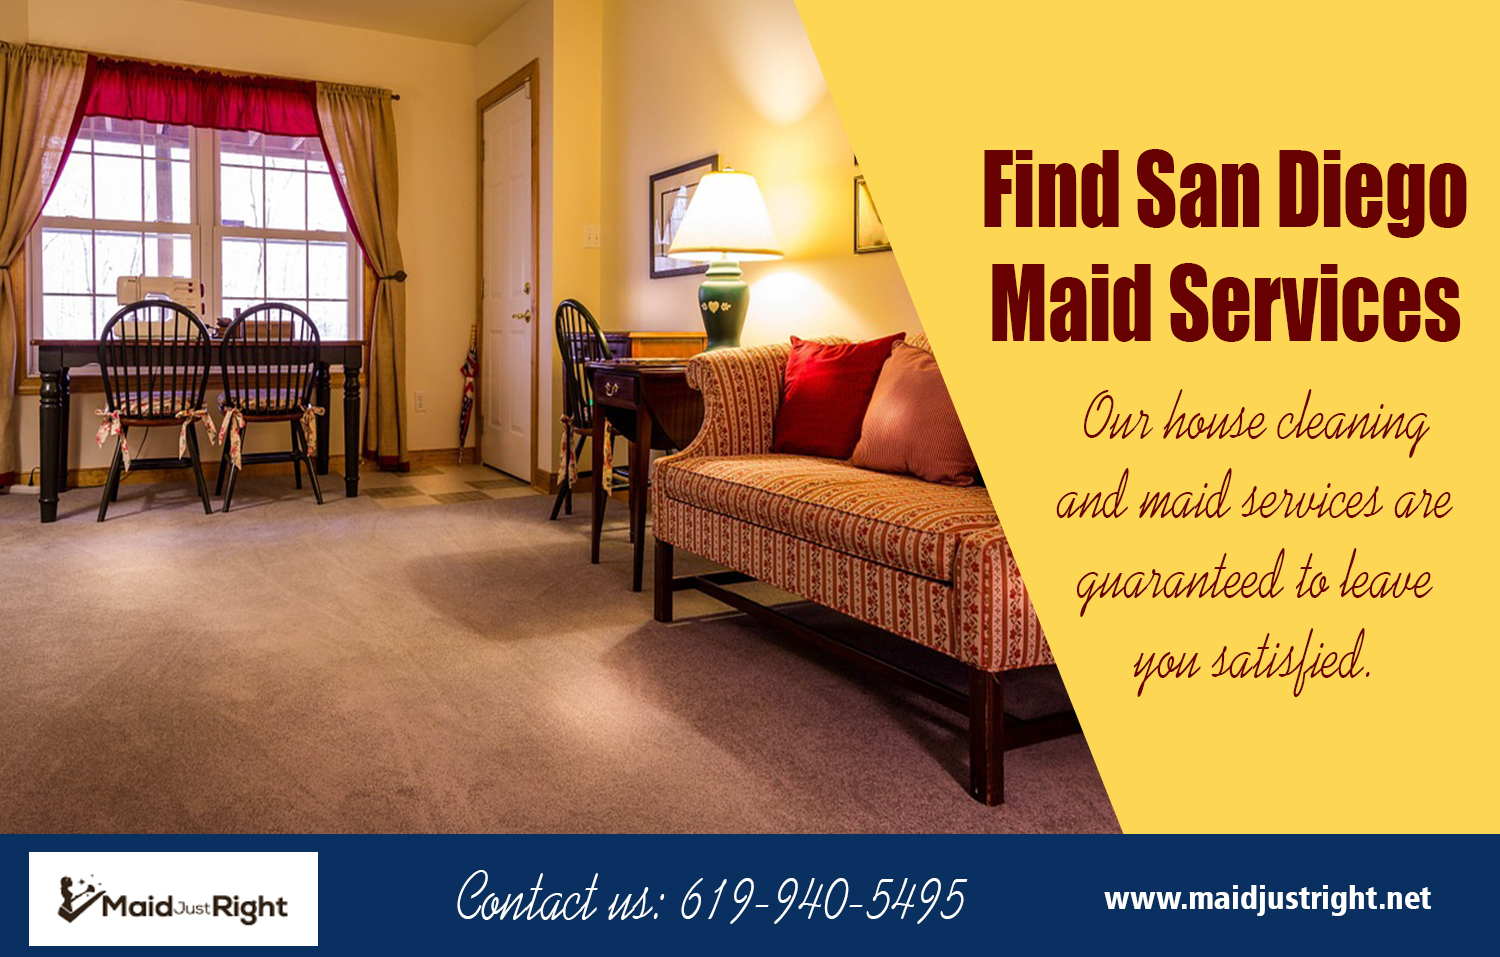 Find San Diego Maid Services | Call Us - 619-940-5495 | maidjustright.net